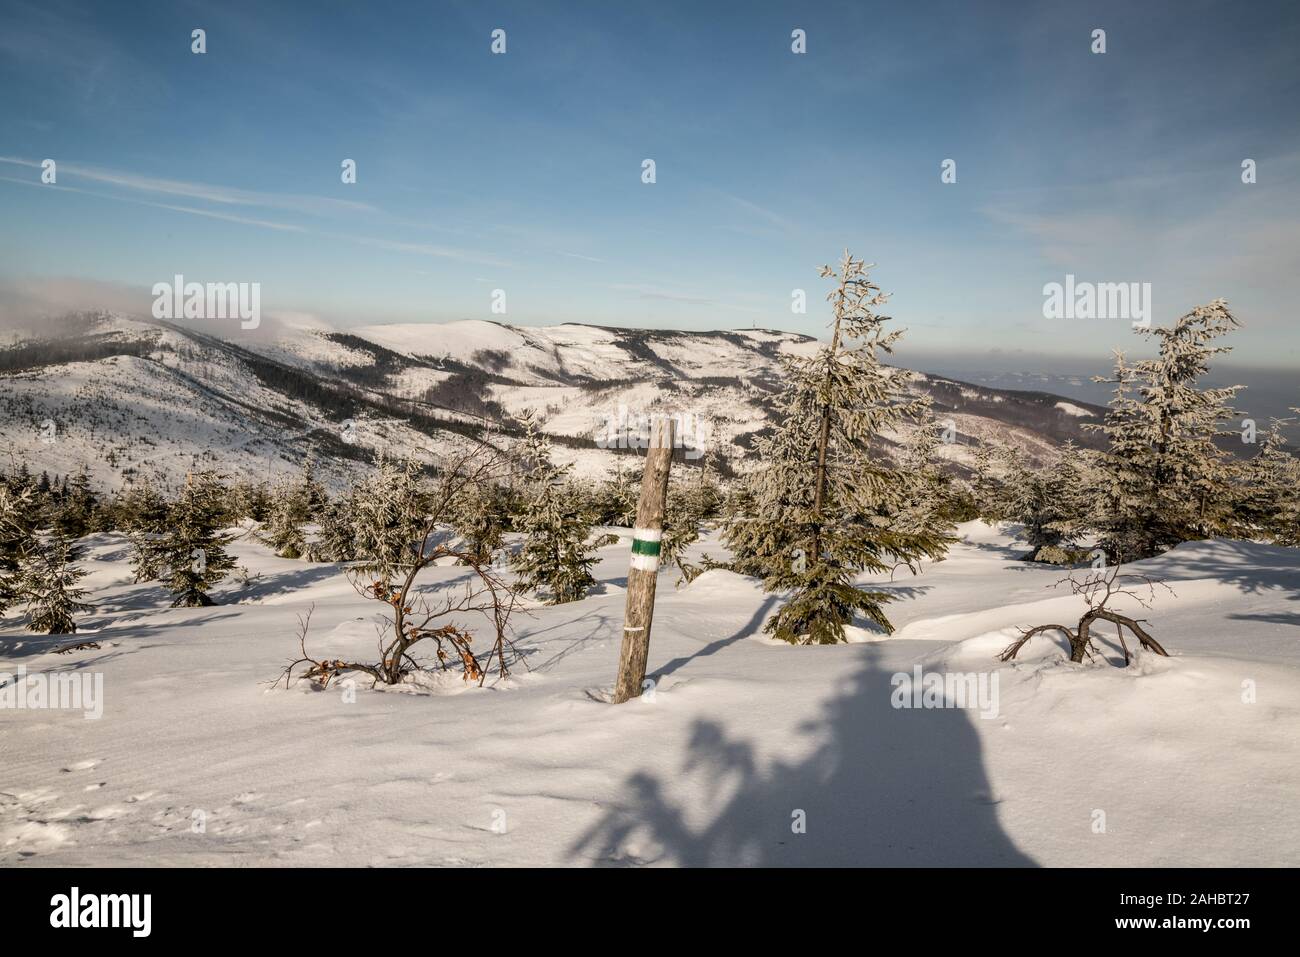 Beskid Slaski mountains with Skrzyczne hill and hiking trail sign in Poland during winter day with blue sky and few clouds Stock Photo